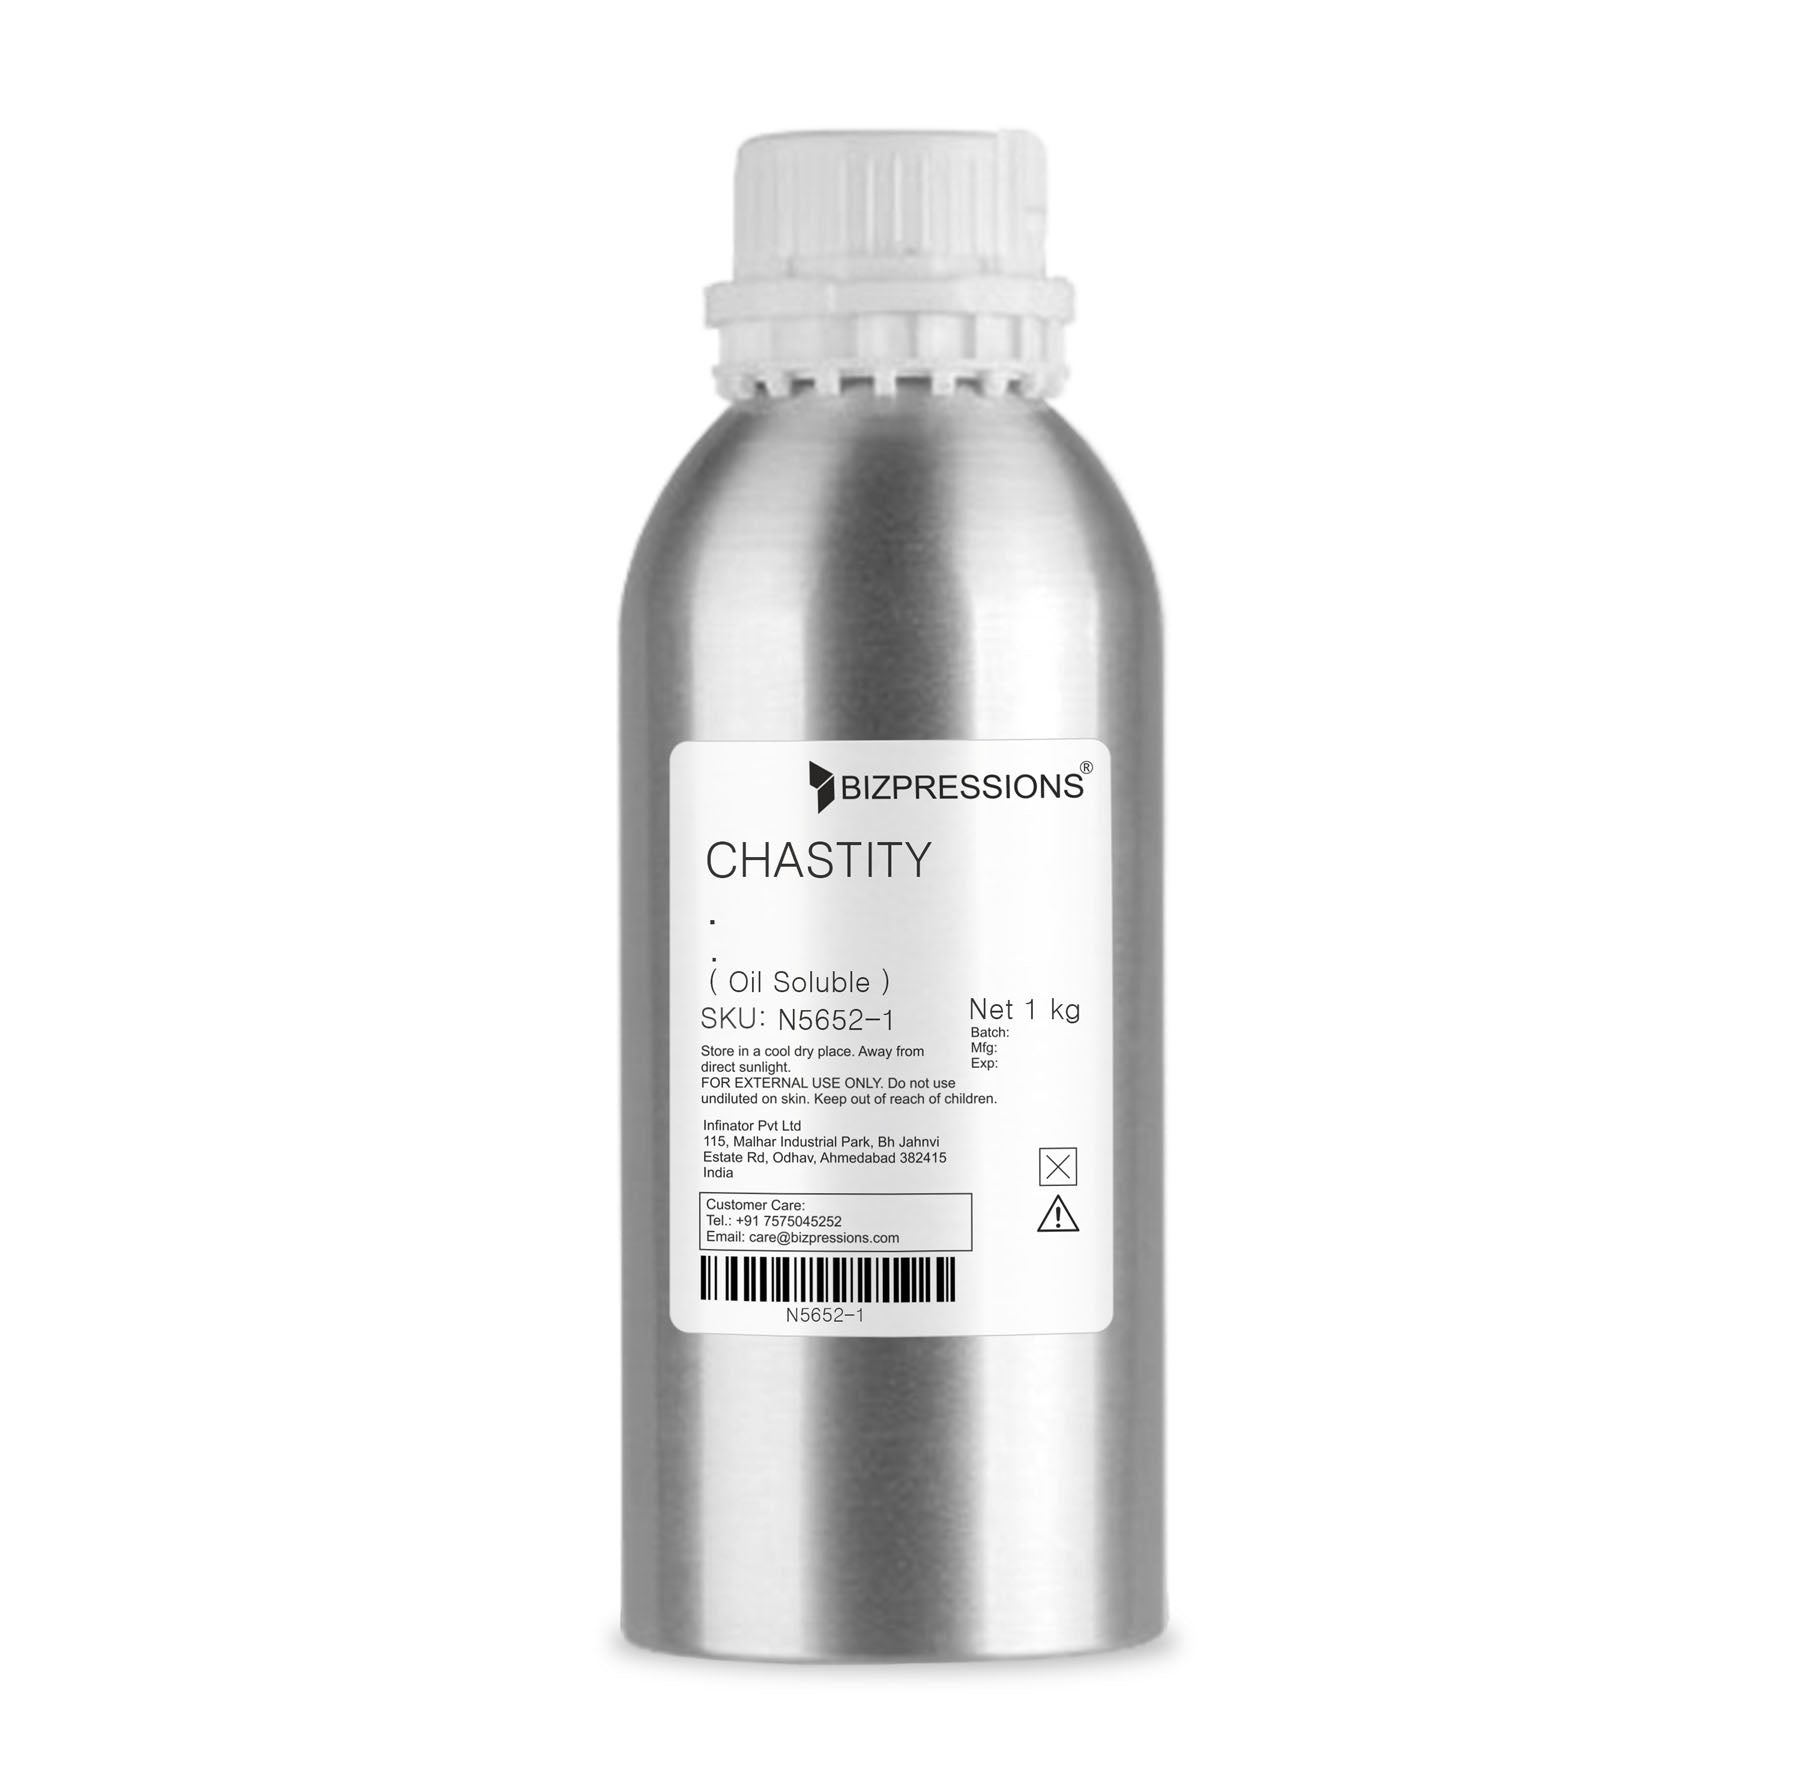 CHASTITY - Fragrance ( Oil Soluble ) - 1 kg